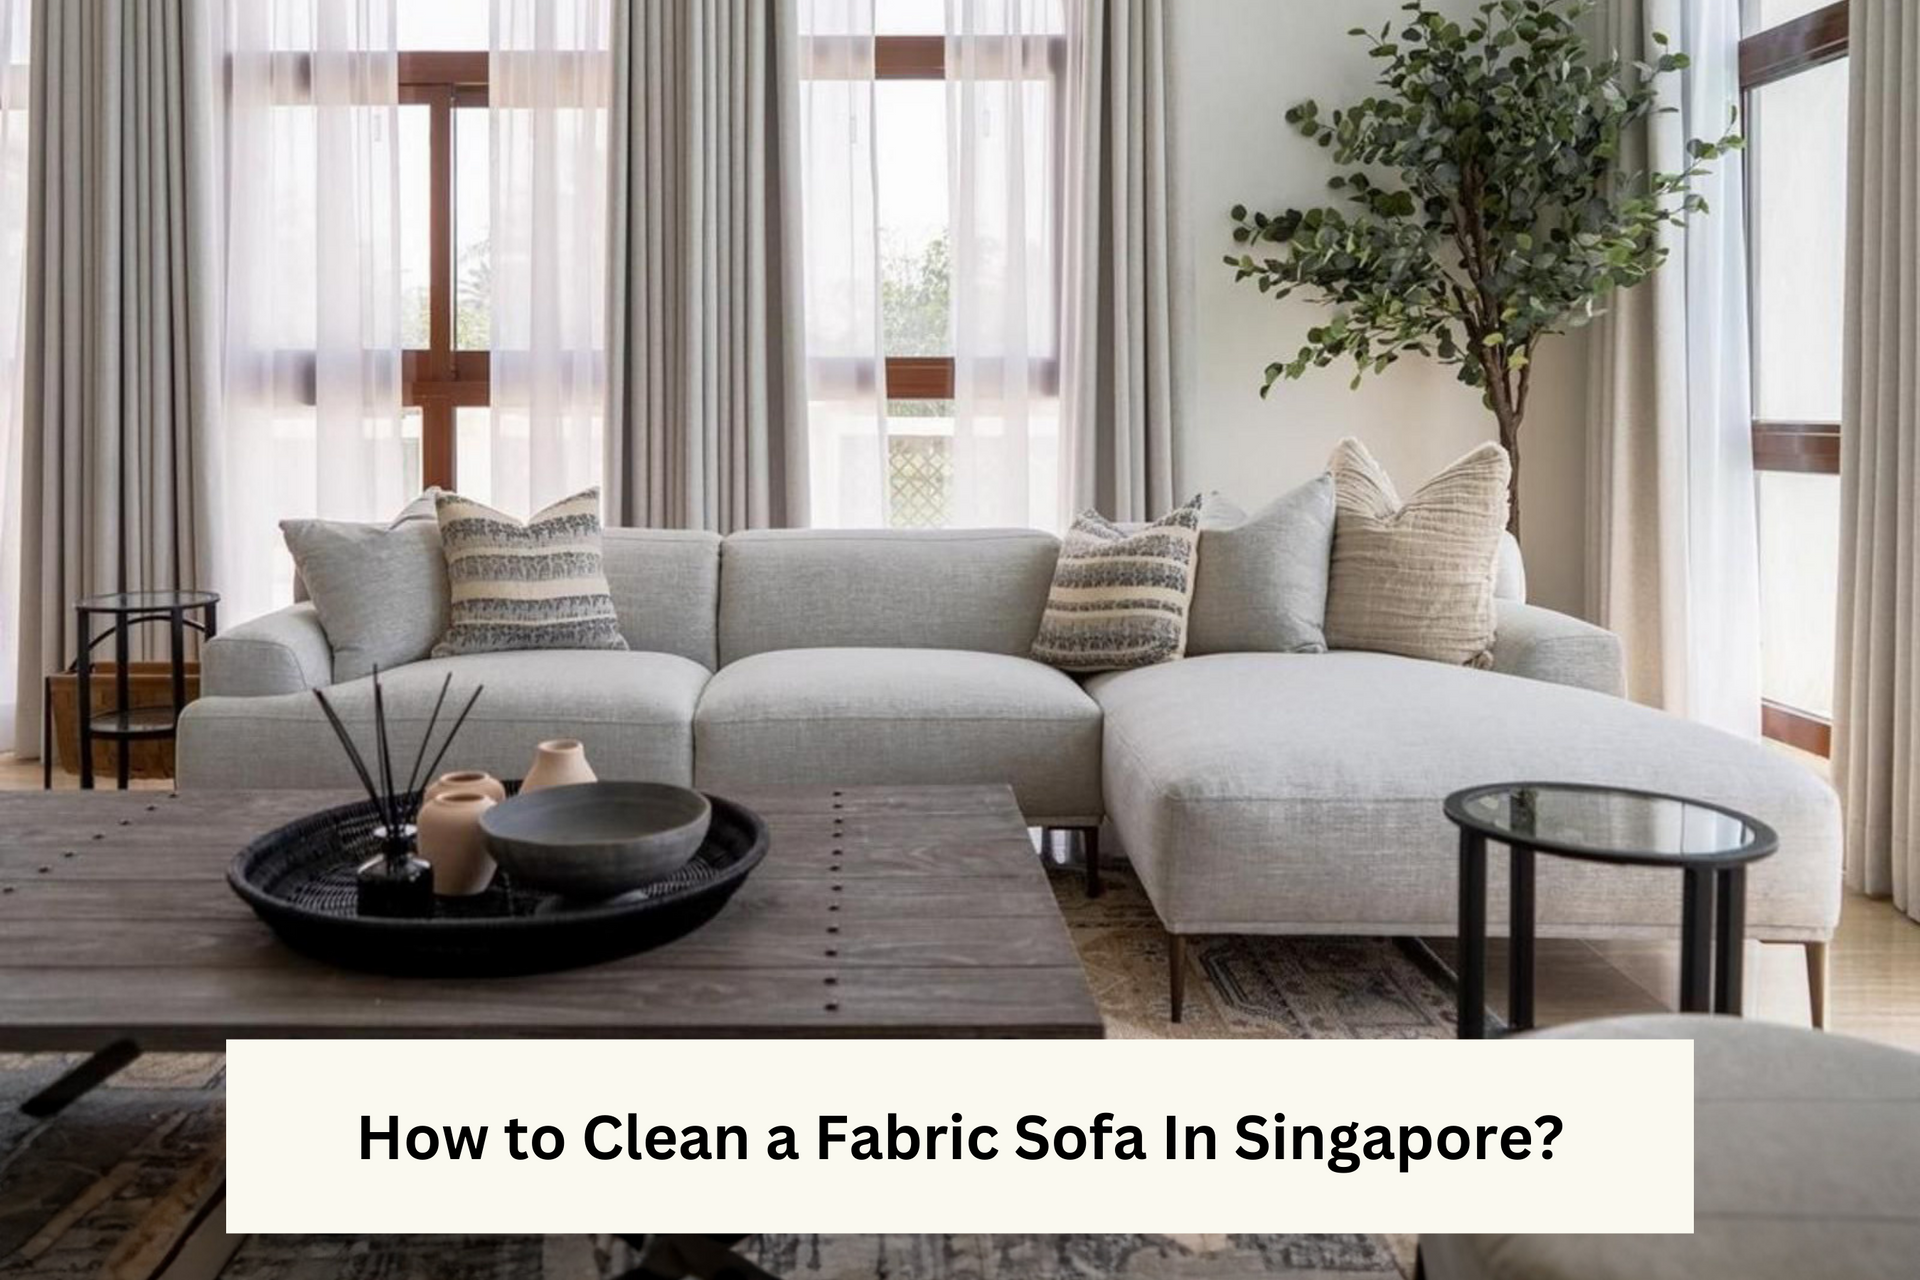 How To Clean A Fabric Sofa In Singapore